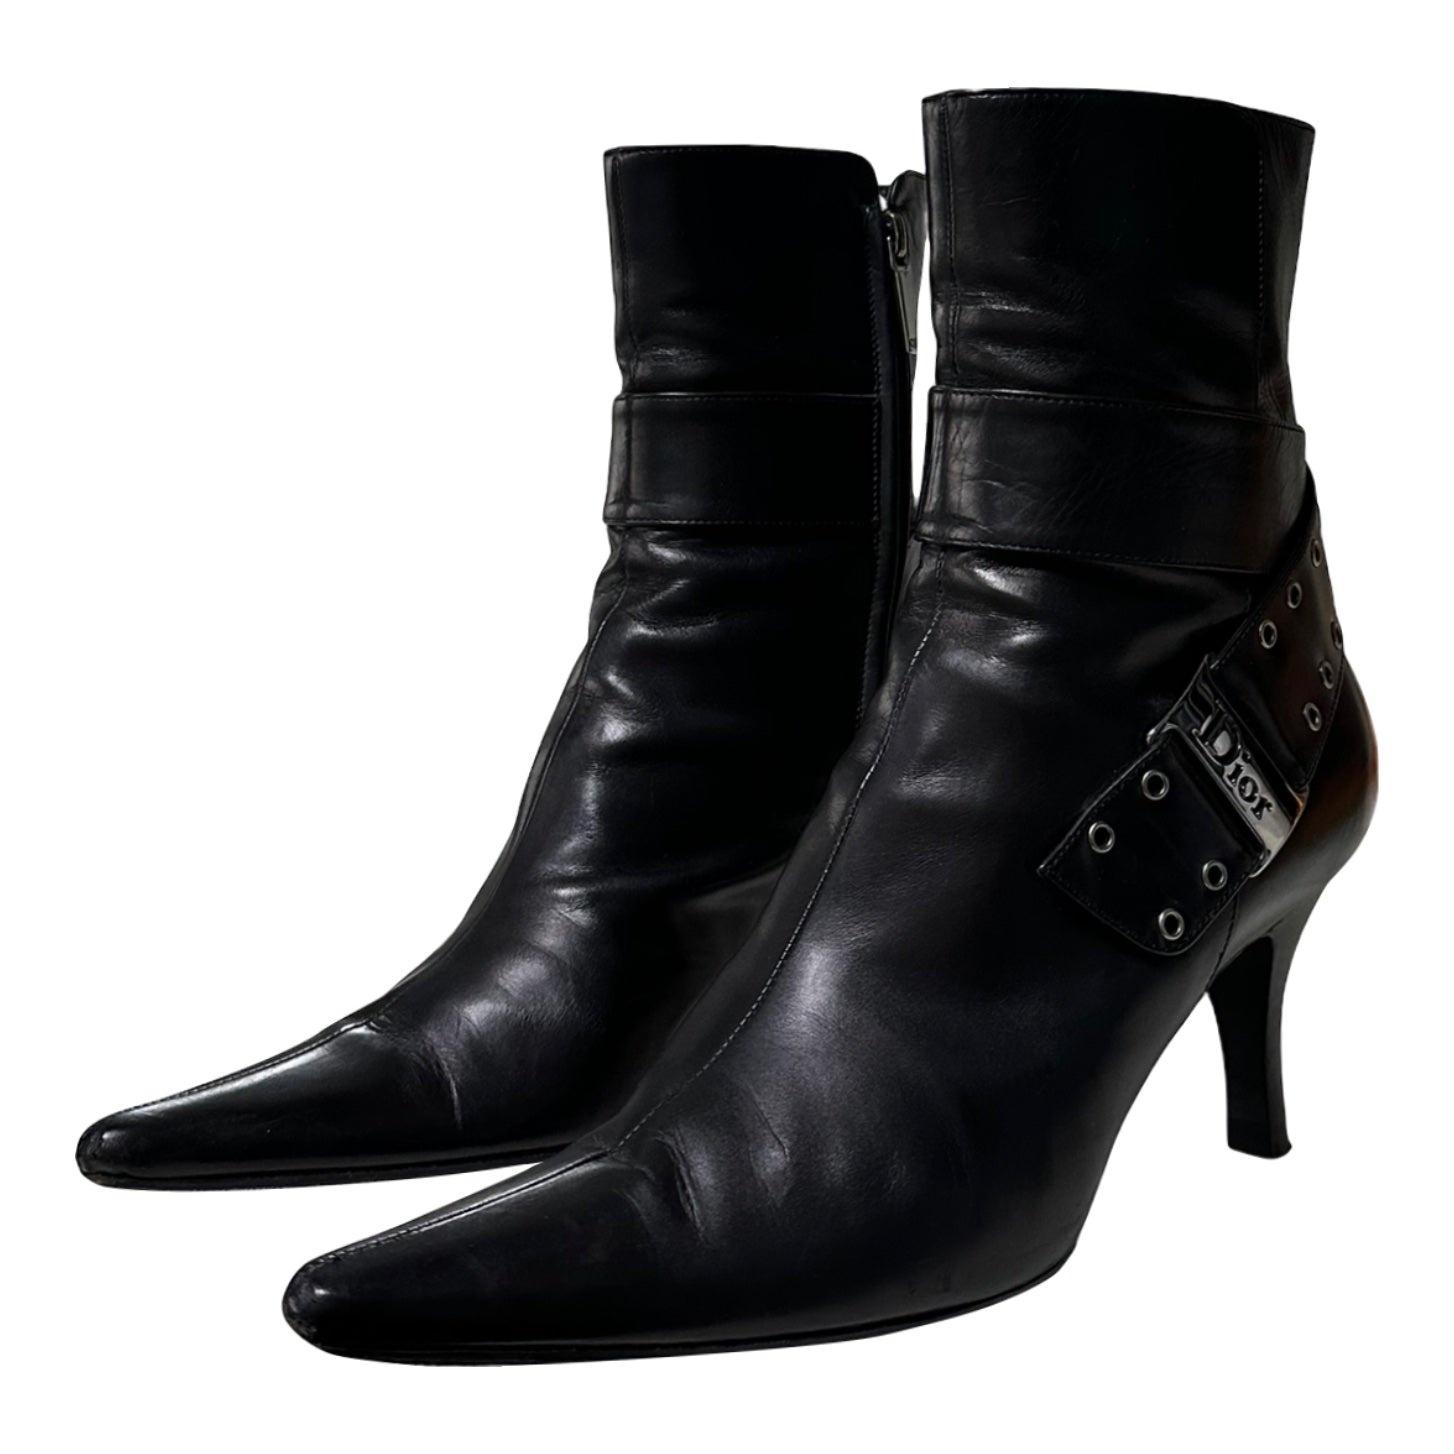 CHRISTIAN DIOR Fall Winter 2004 Leather Buckle Ankle Boots - 1